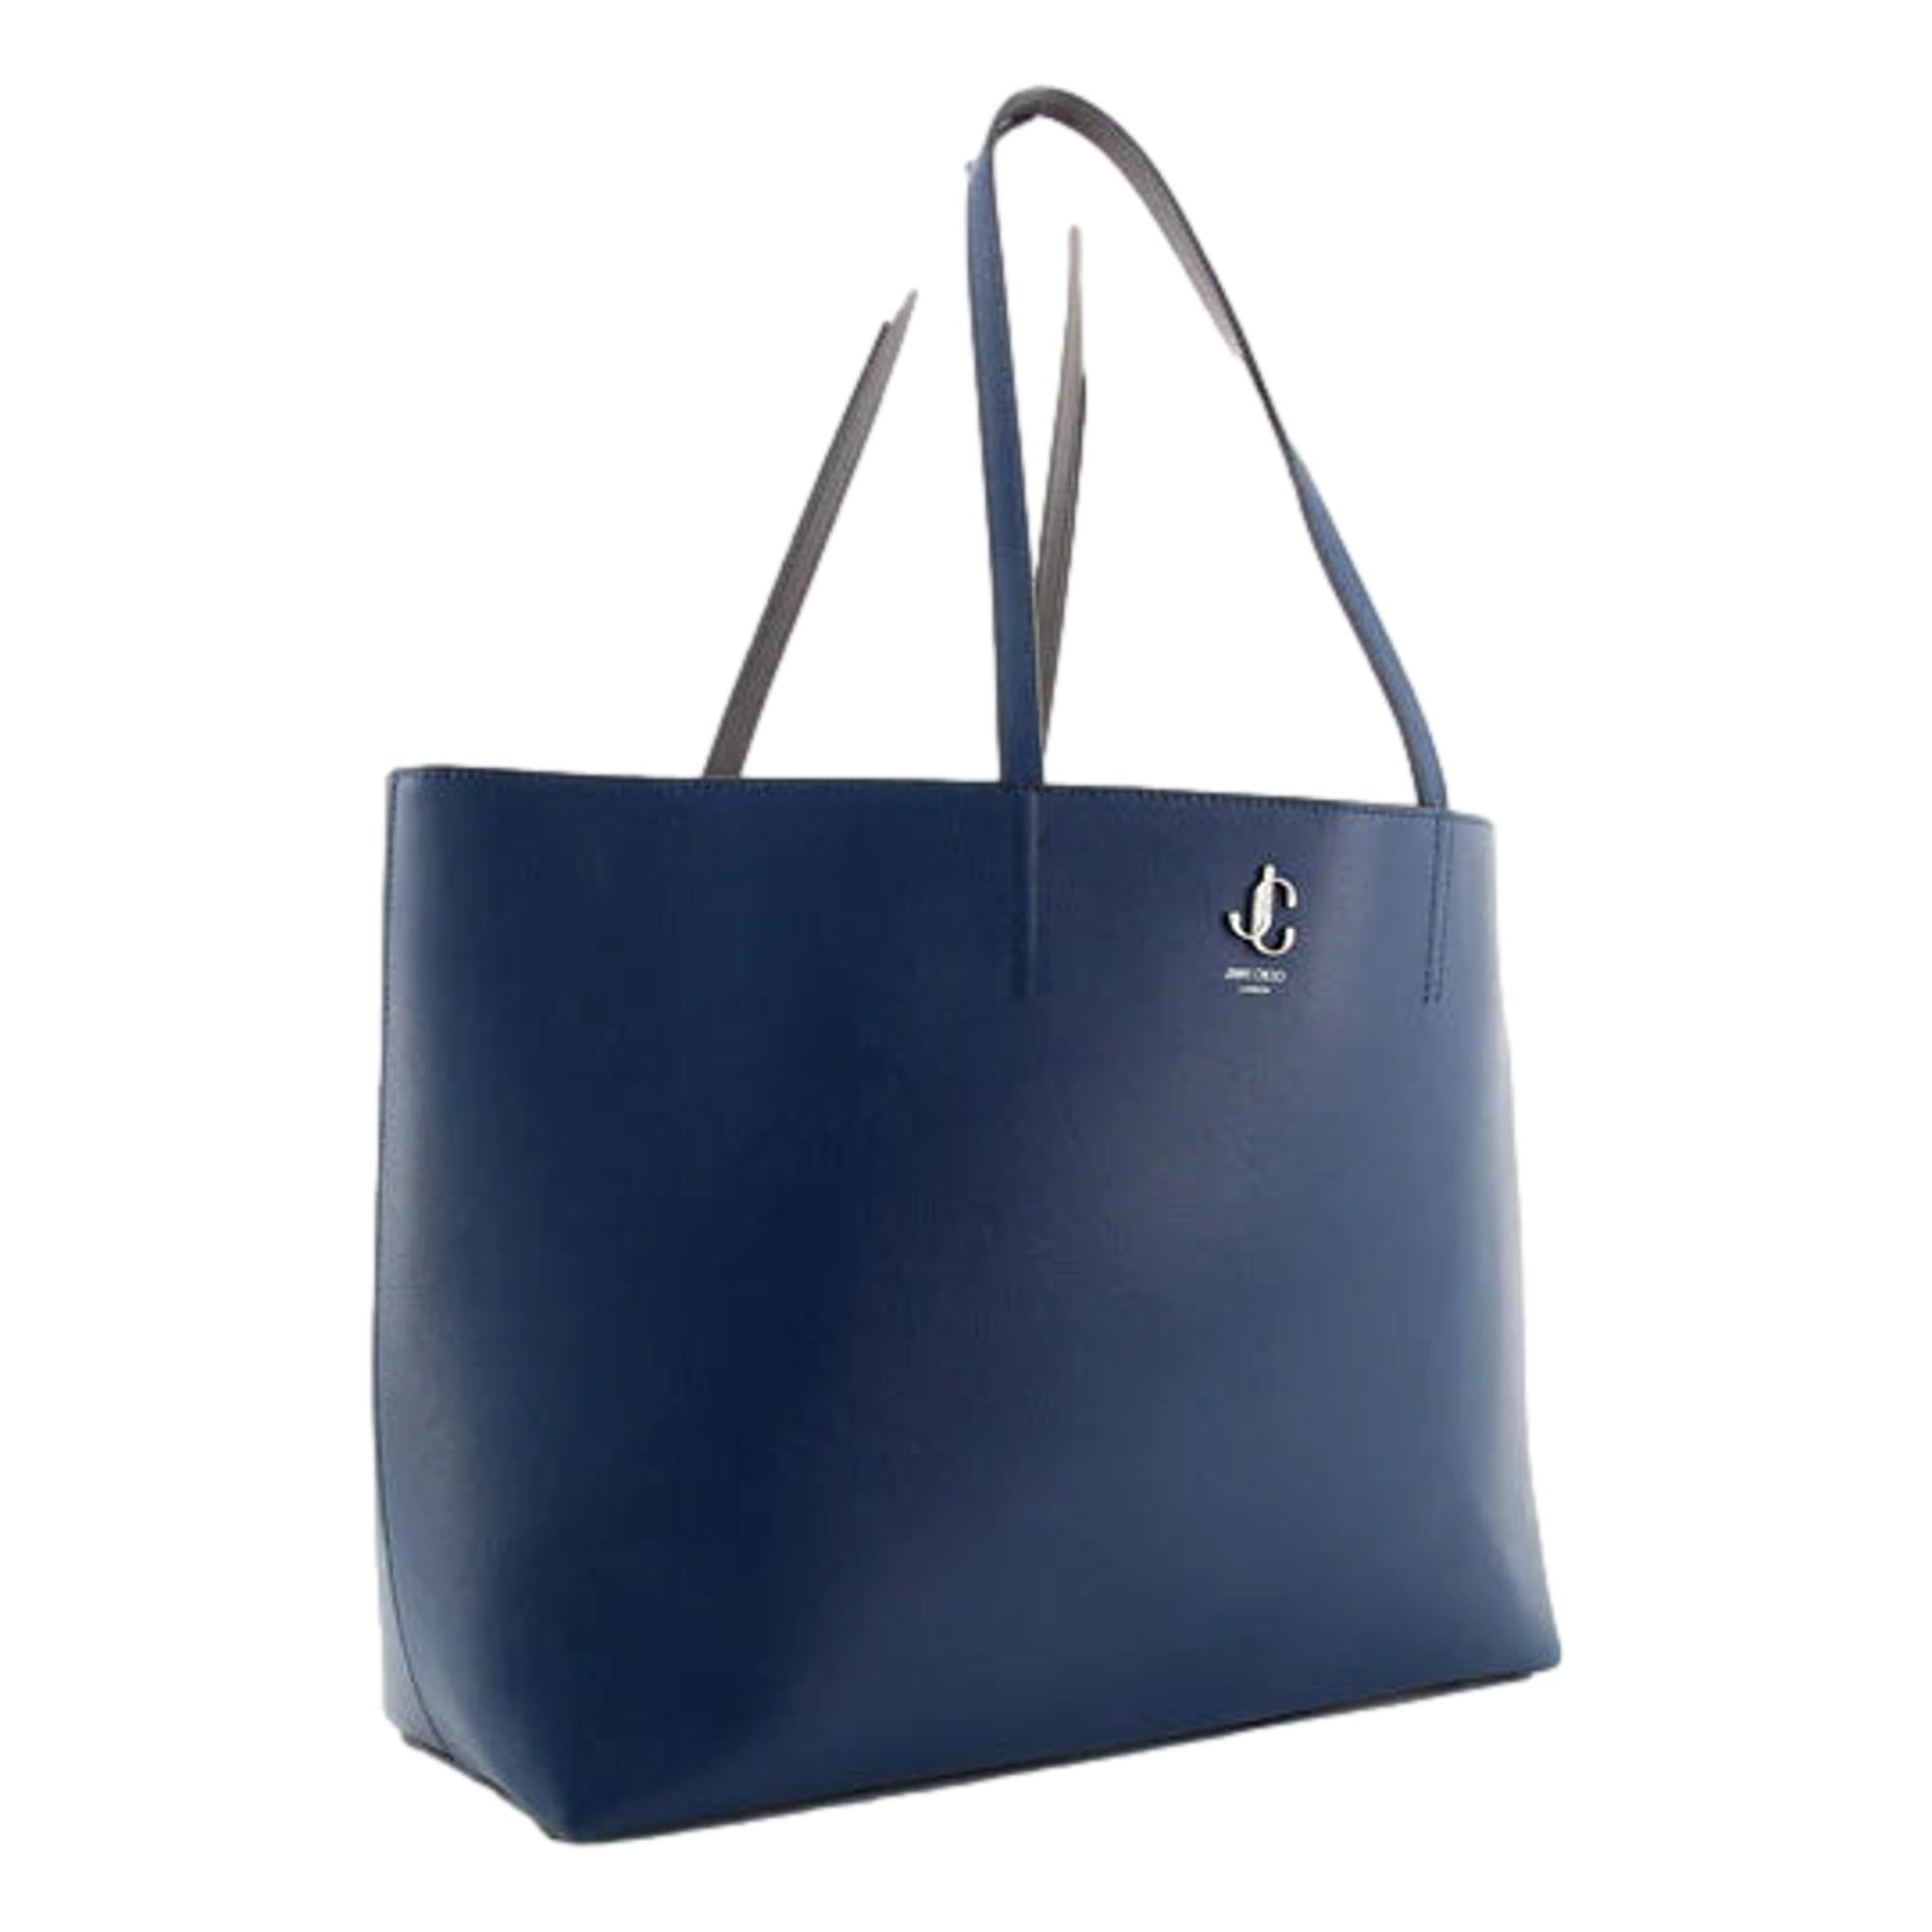 JImmy Choo Martina Dark Blue Leather Tote OGLR | 028 at_Queen_Bee_of_Beverly_Hills